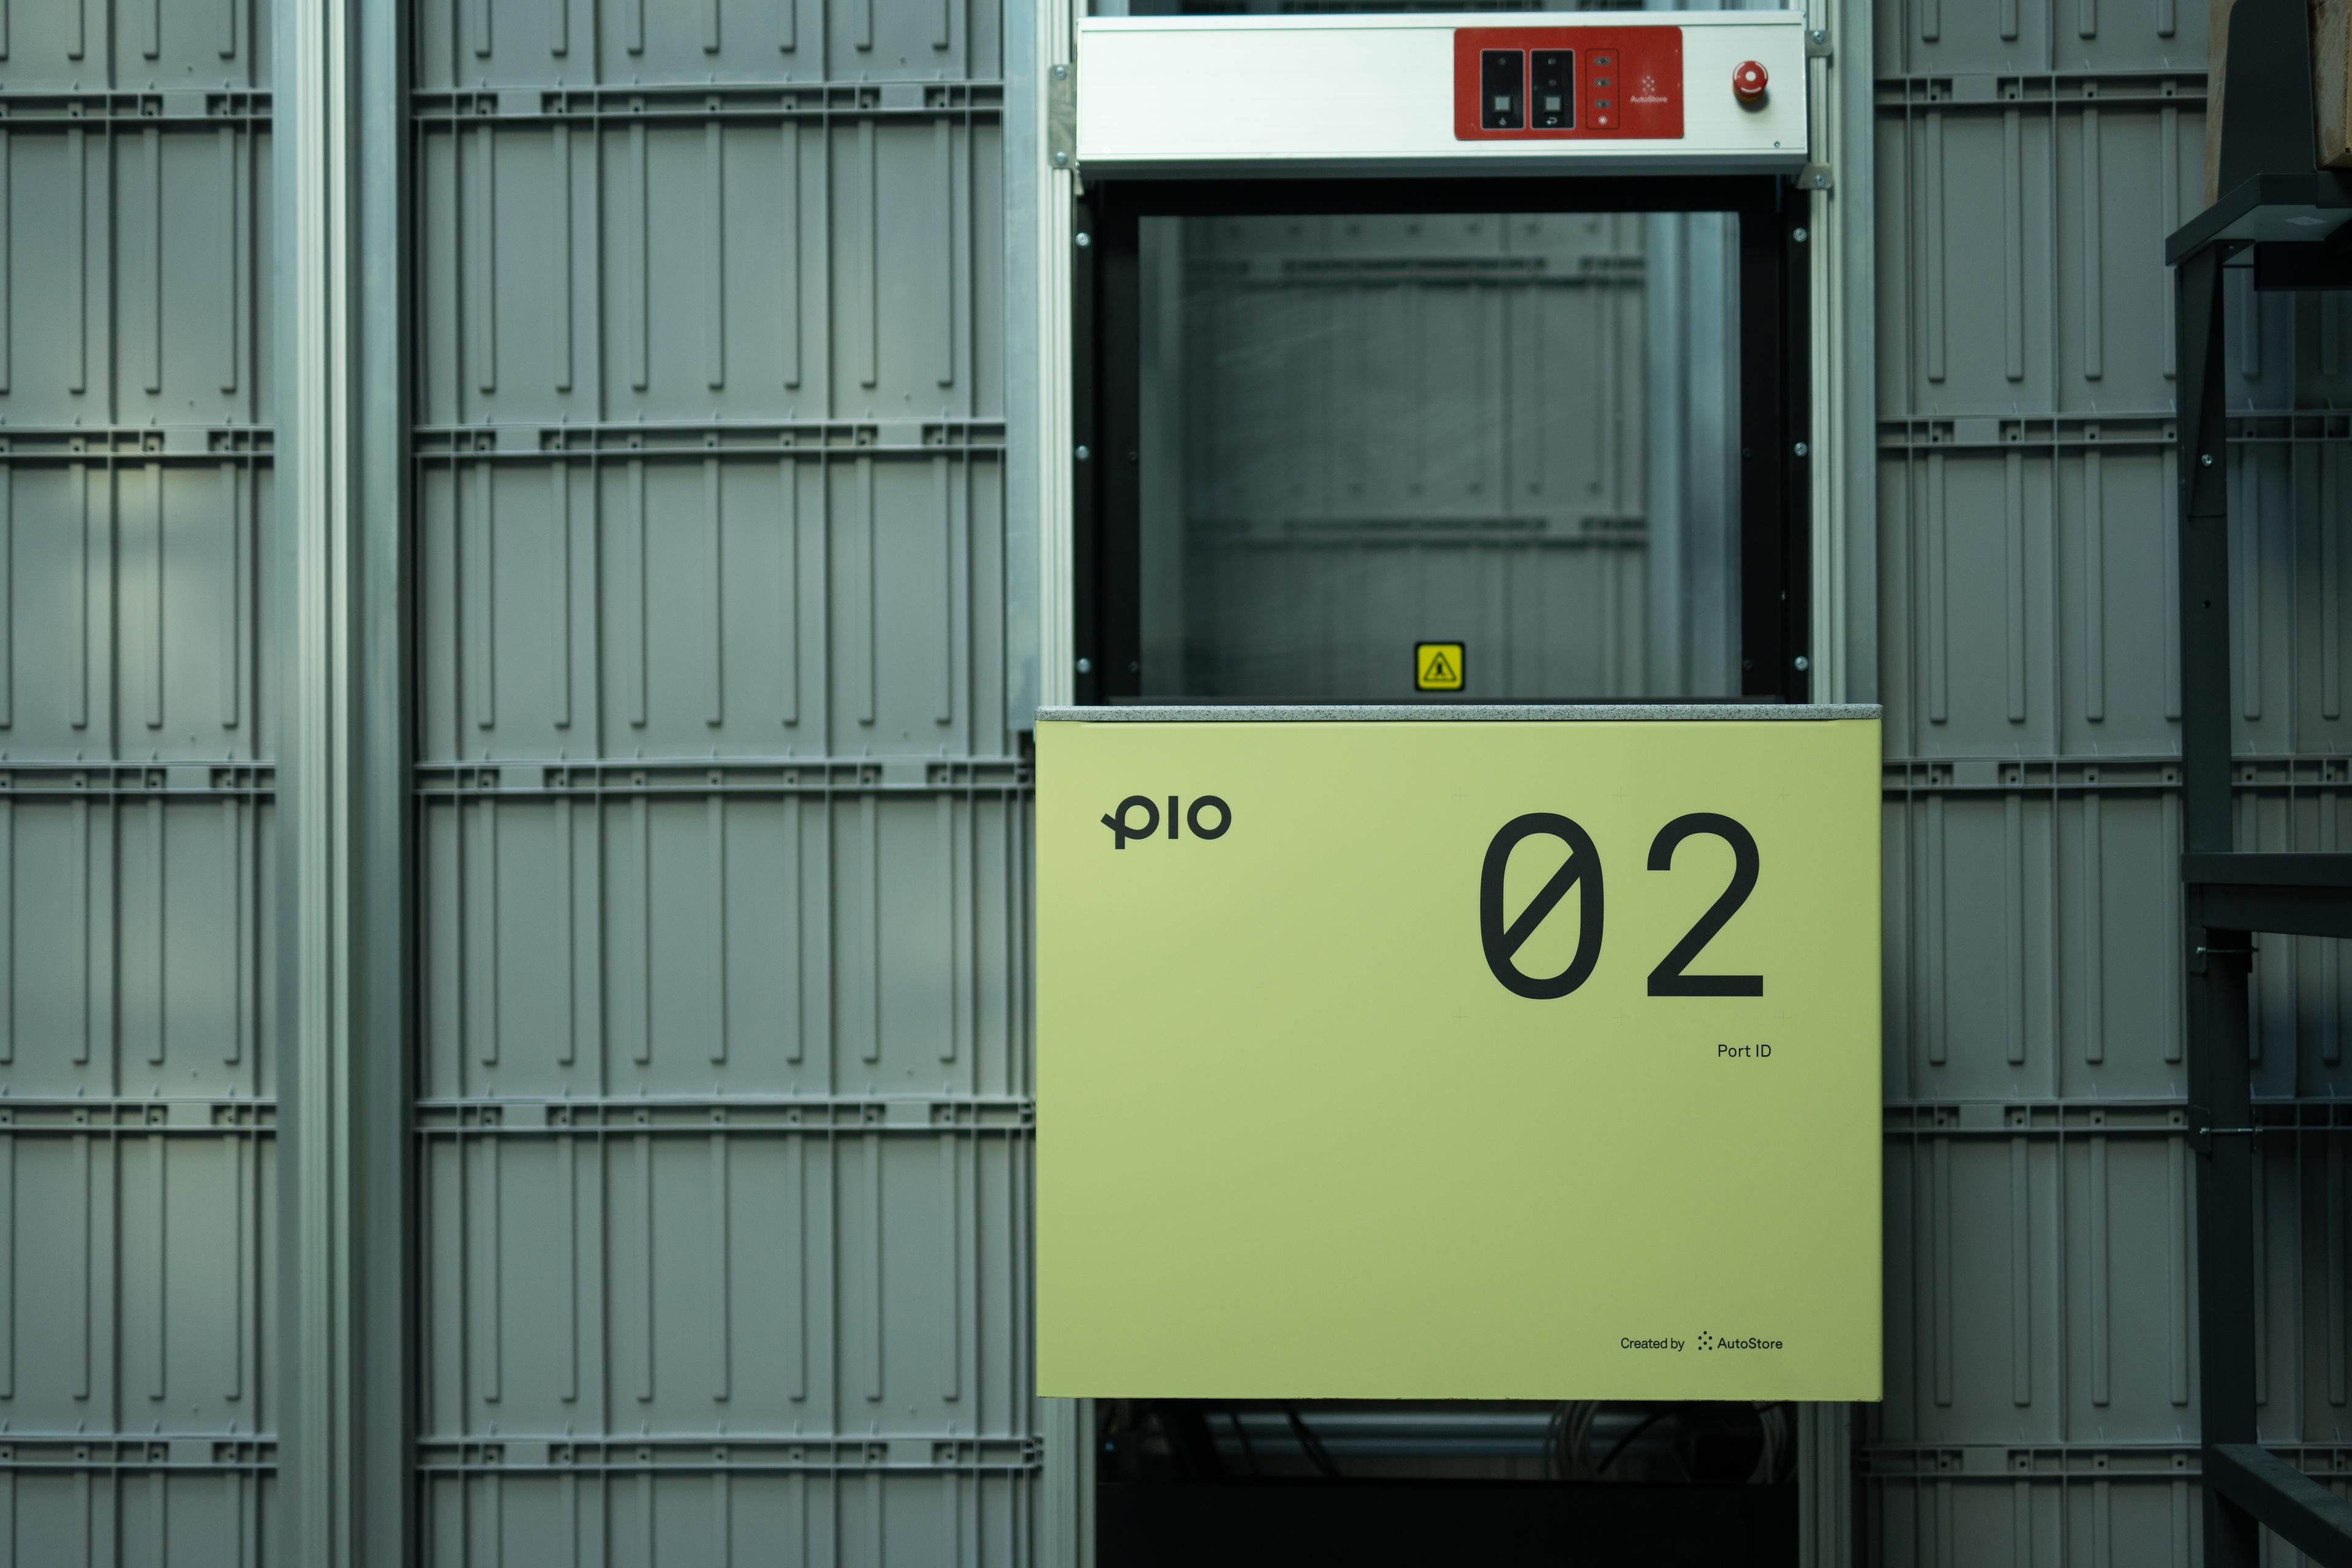 A Pio port is where the workers can pick the orders from the different bins presented by the automated robots